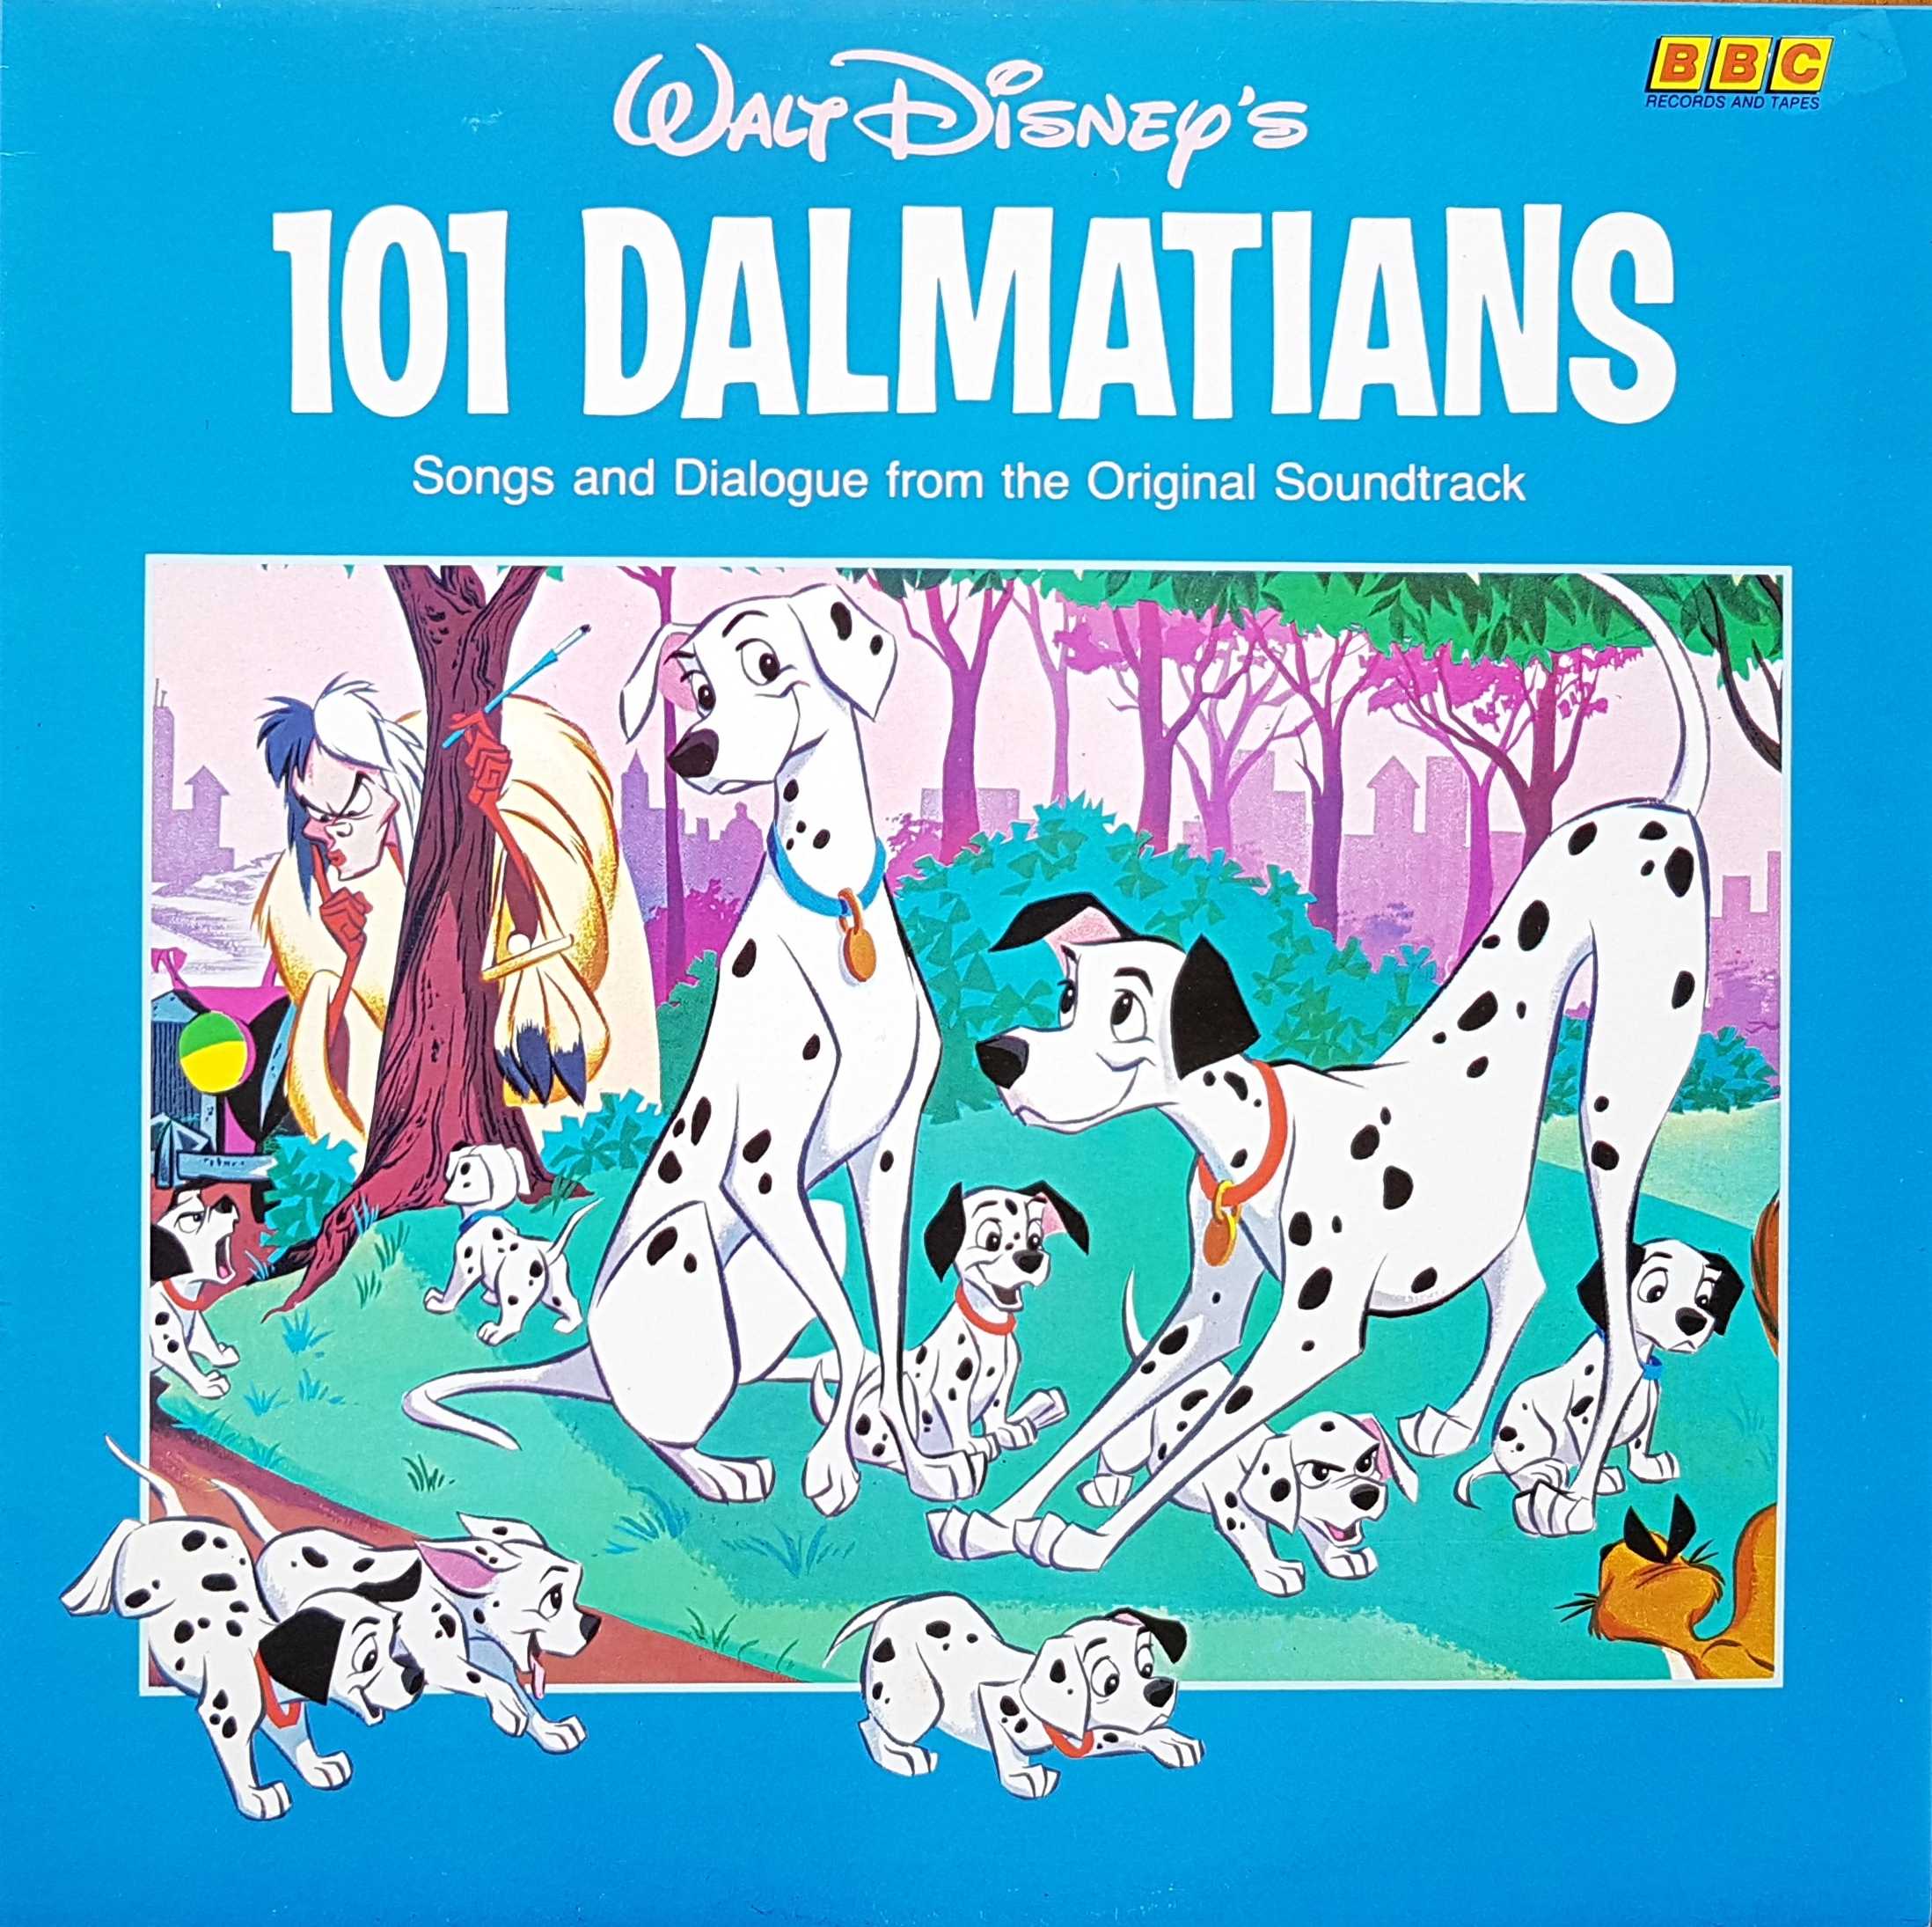 Picture of REC 544 101 dalmatians by artist Bruns / Dunham / Mel Leven from the BBC albums - Records and Tapes library